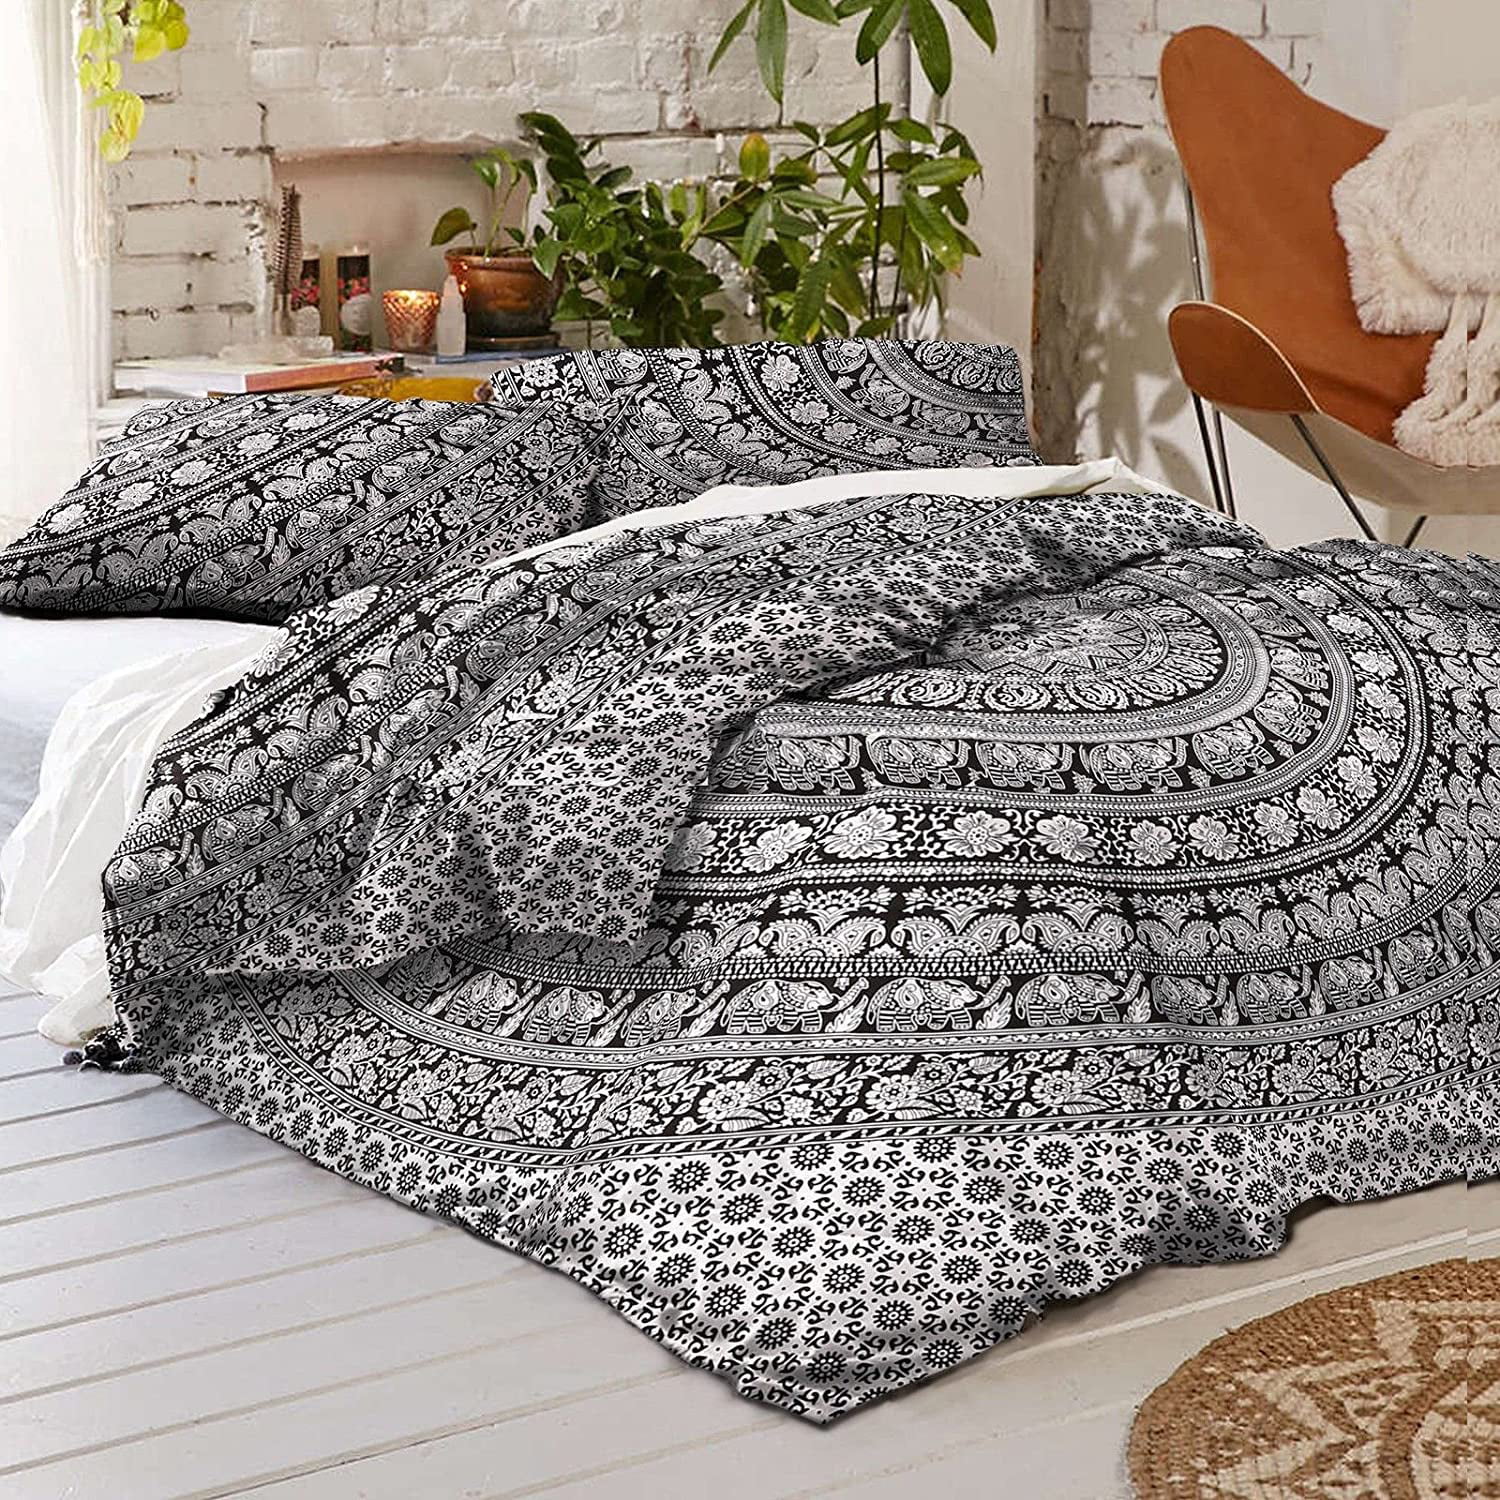 Indian Wall Hanging Twin Size Ombre Mandala Bedcover Ethnic Tapestry Home Decor 